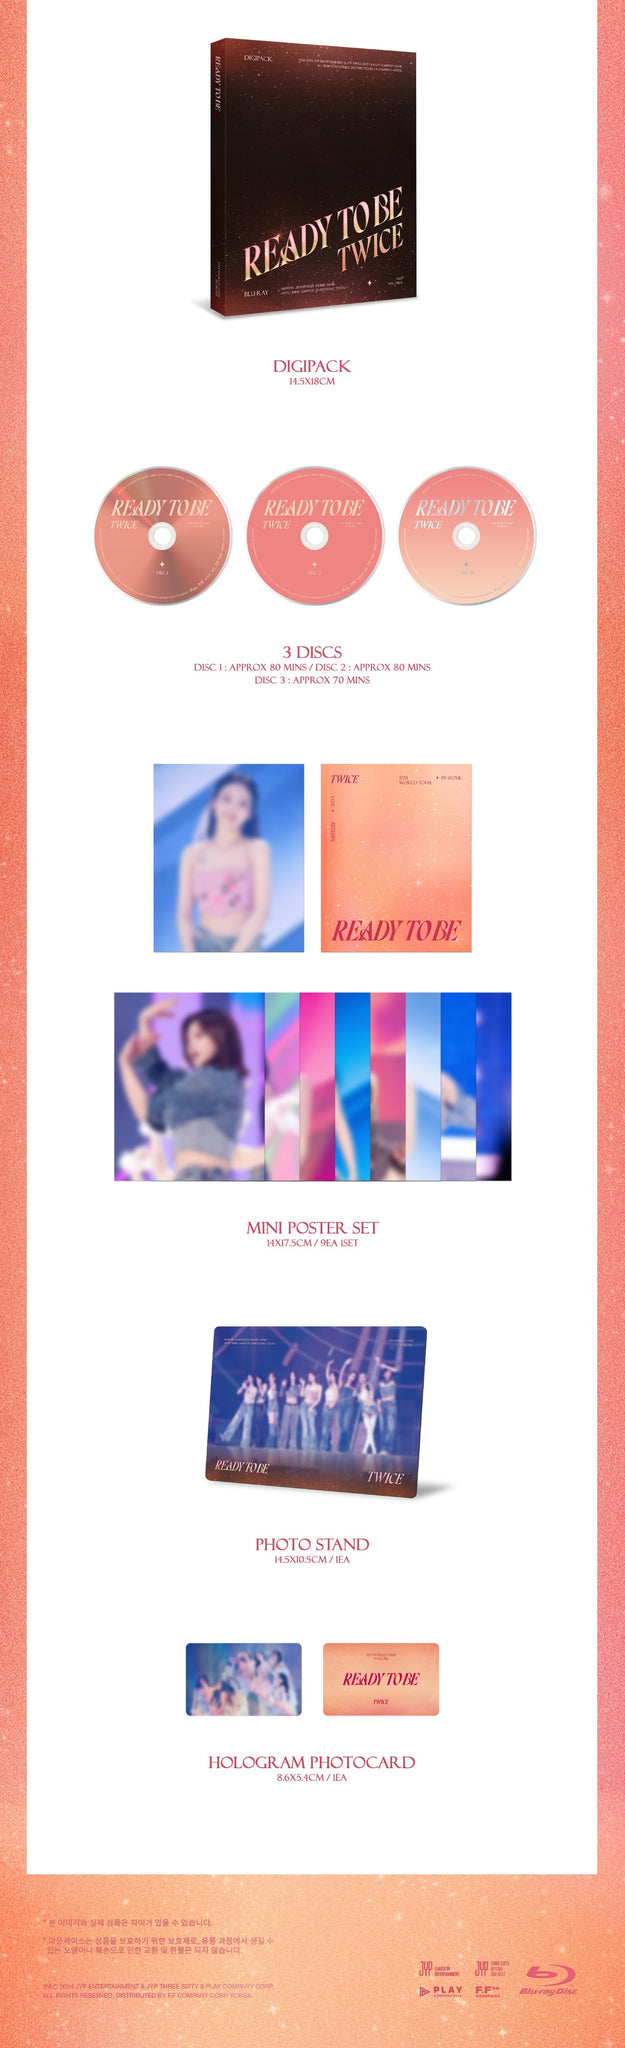 TWICE 5TH WORLD TOUR 'READY TO BE' IN SEOUL Blu-ray Inclusions: Digipack, 3 Discs, Mini Poster Set, Photo Stand, Hologram Photocard